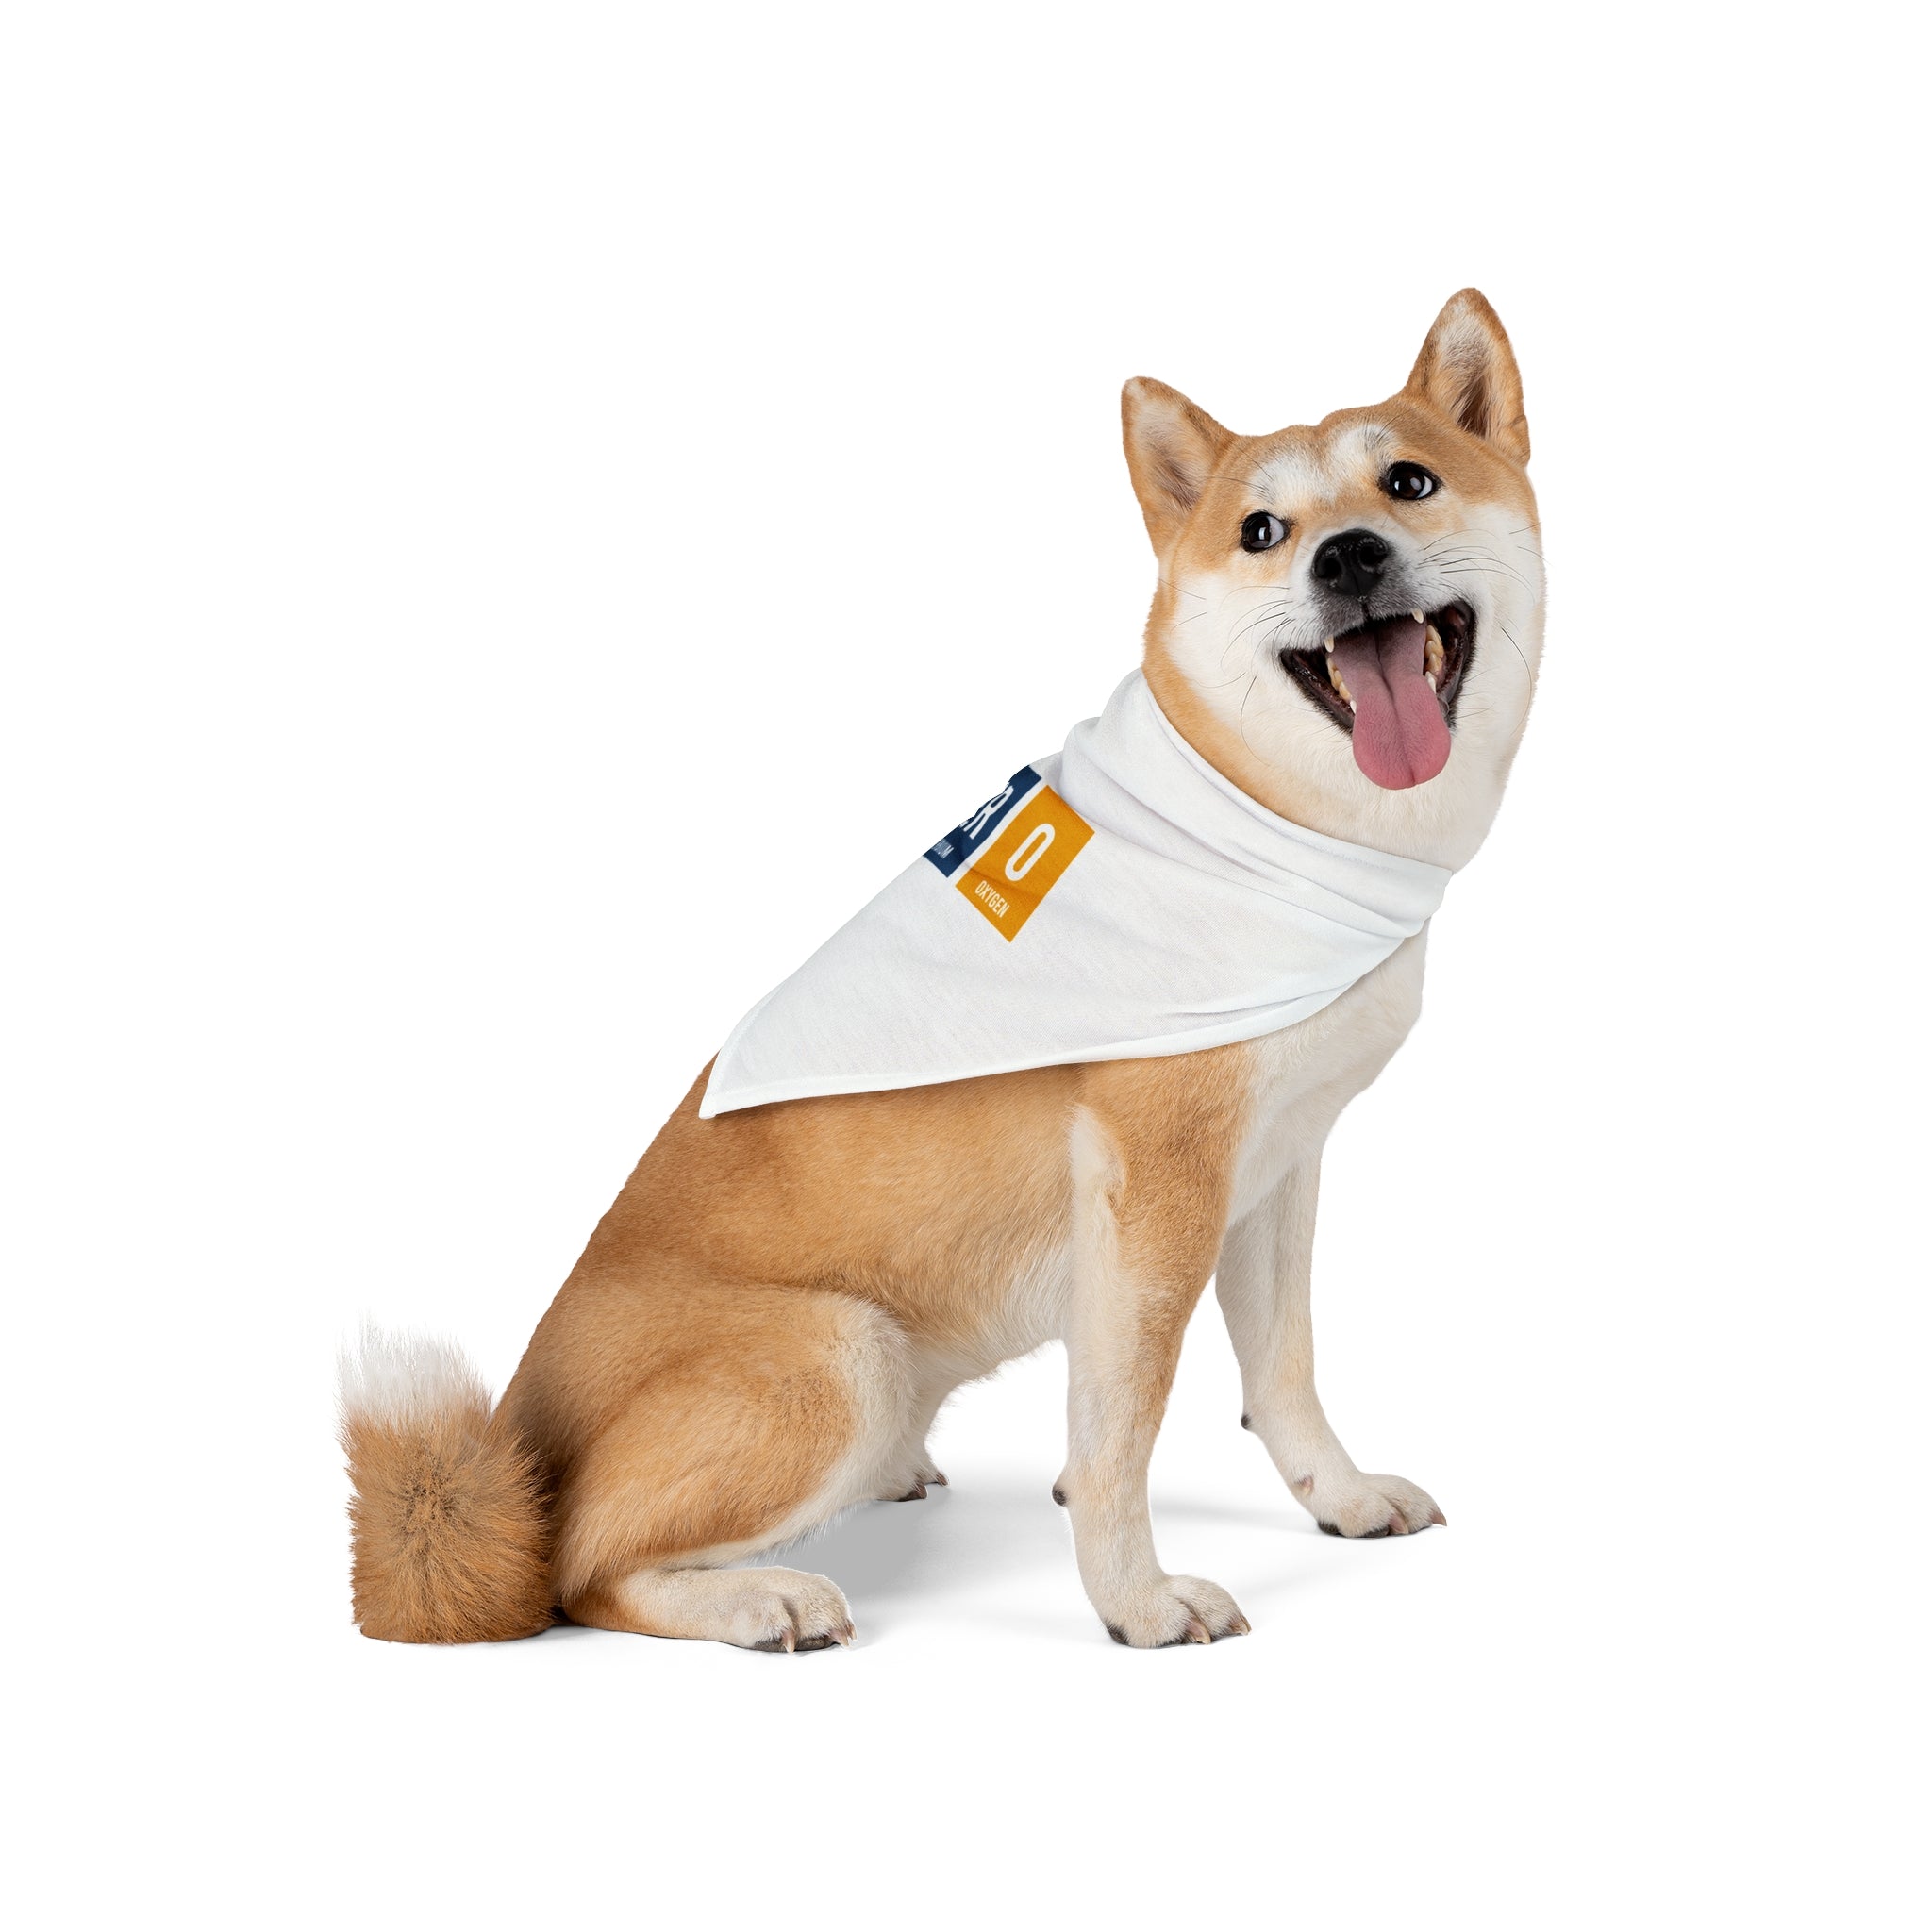 A Shiba Inu dog wearing a stylish HERO - Pet Bandana made from soft-spun polyester sits against a plain white background, looking to the side with its mouth open and tongue out.